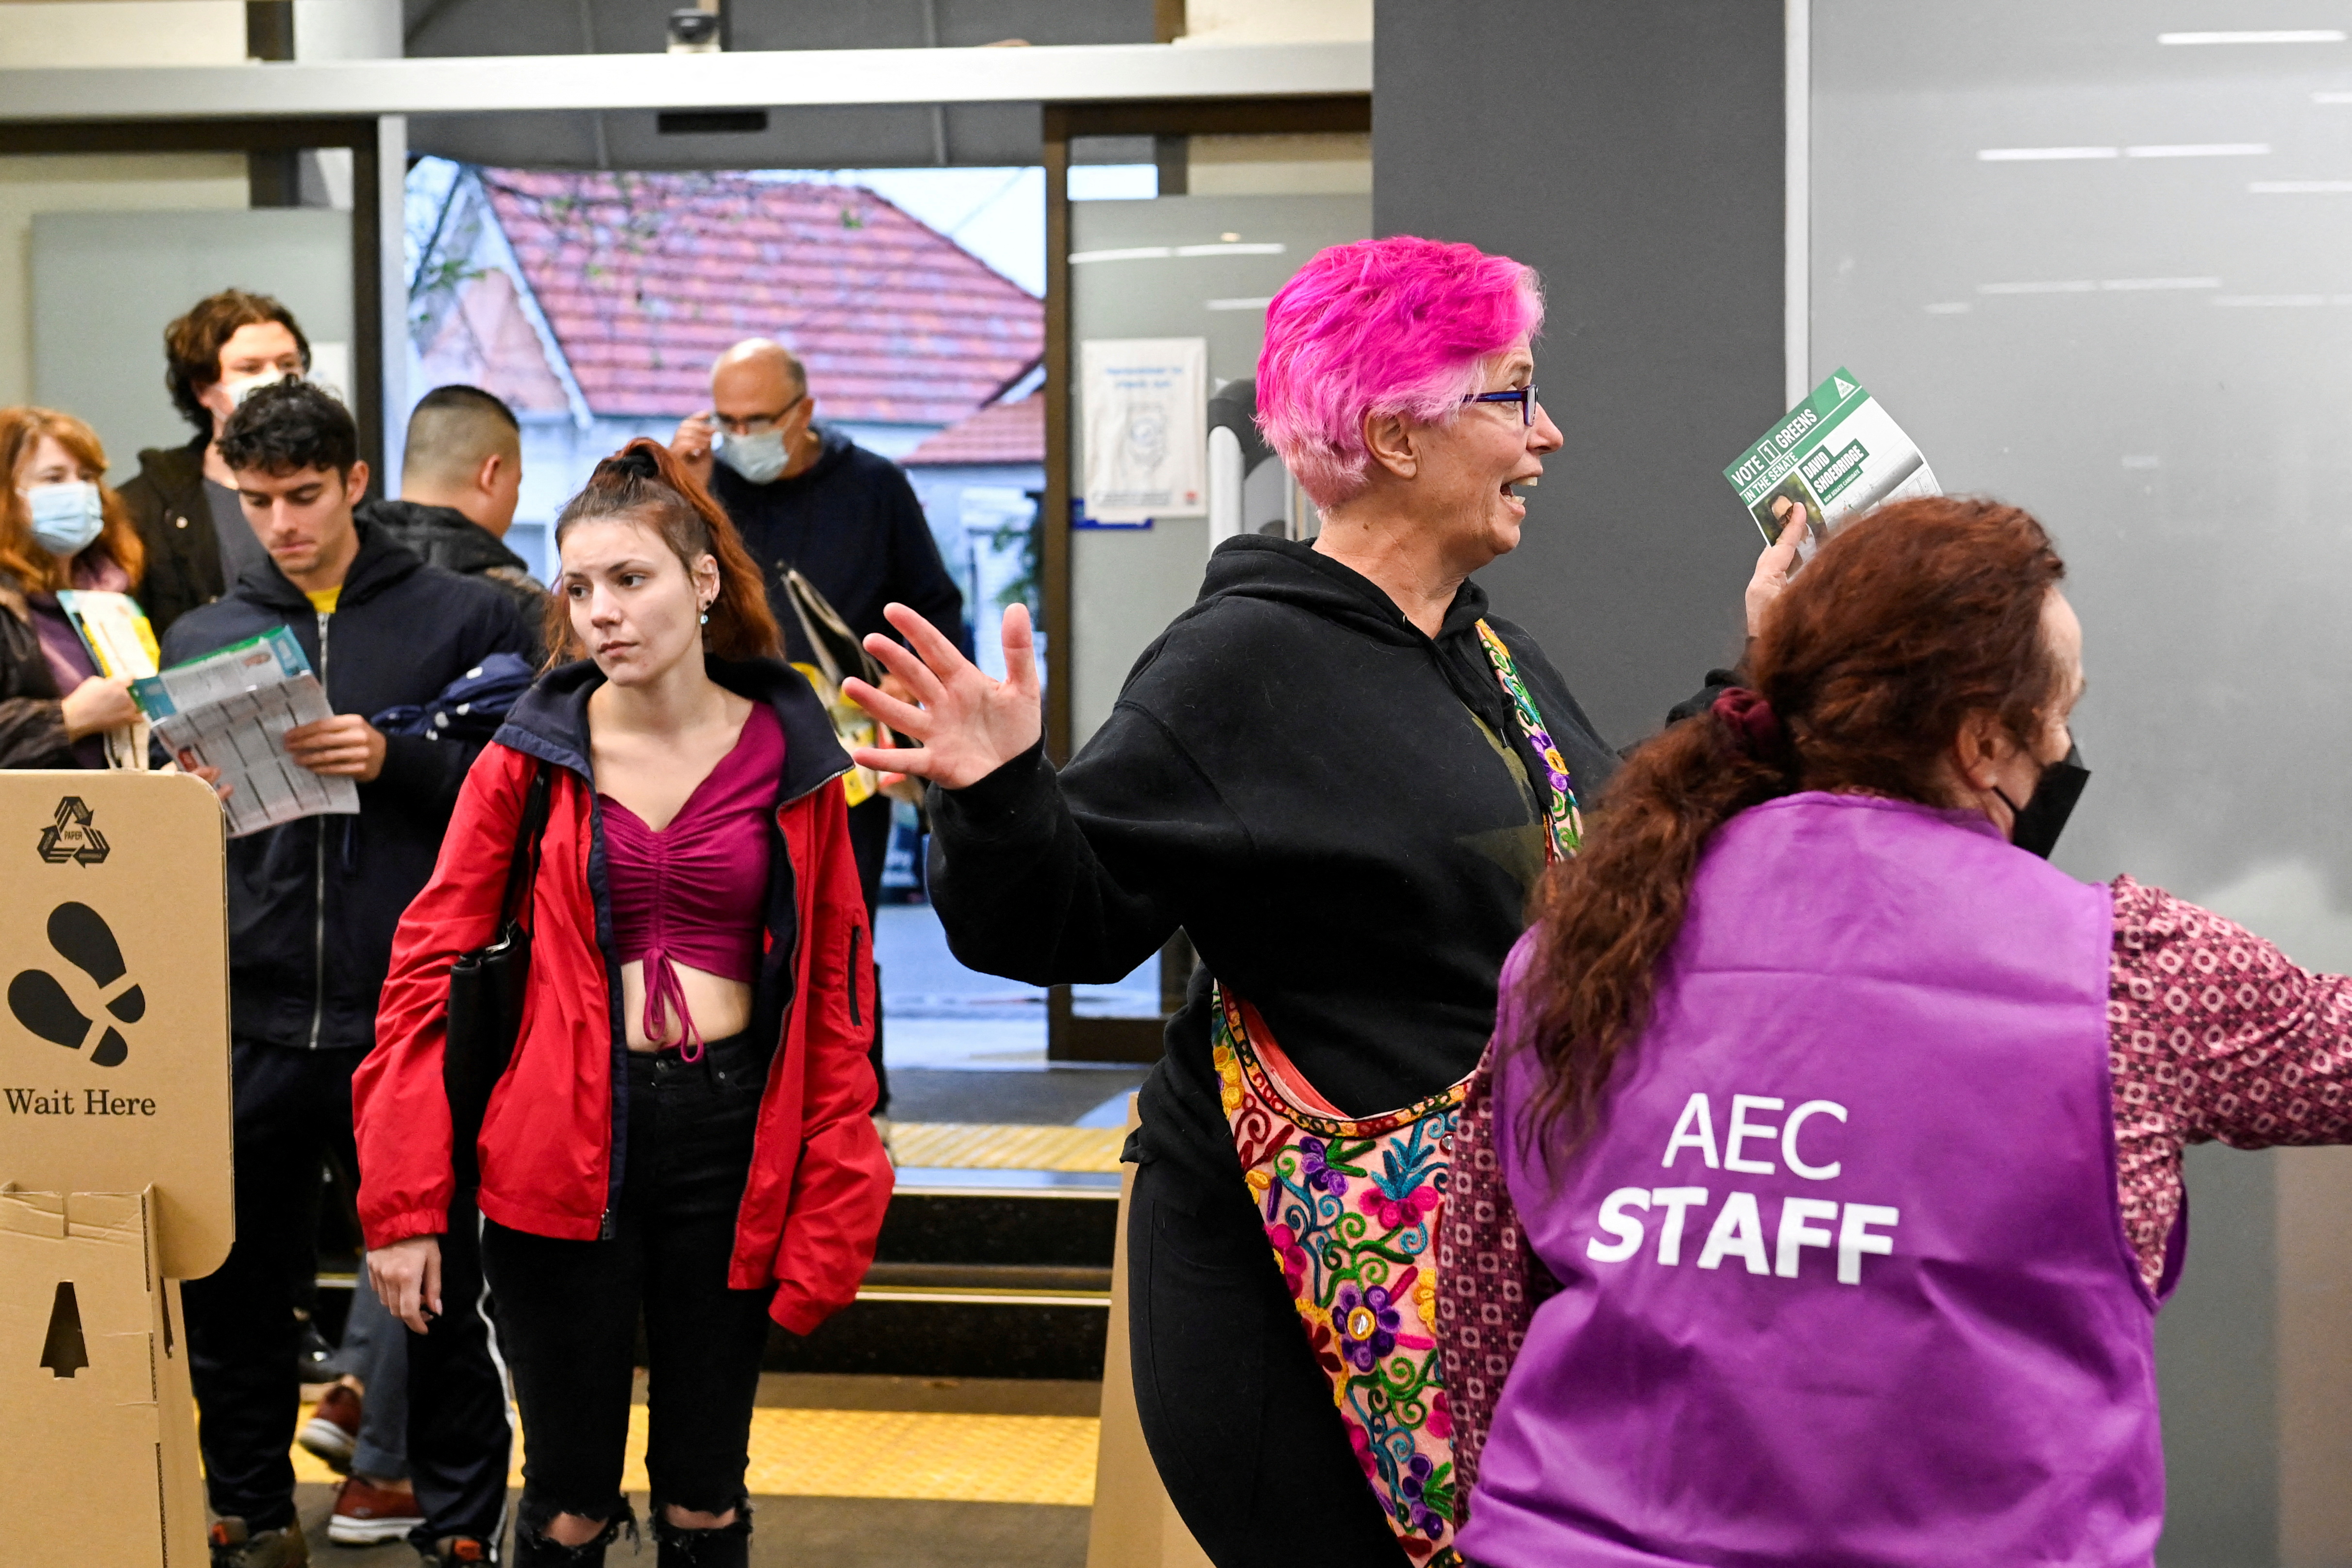 A scene at a polling station on Australian national election day in Sydney